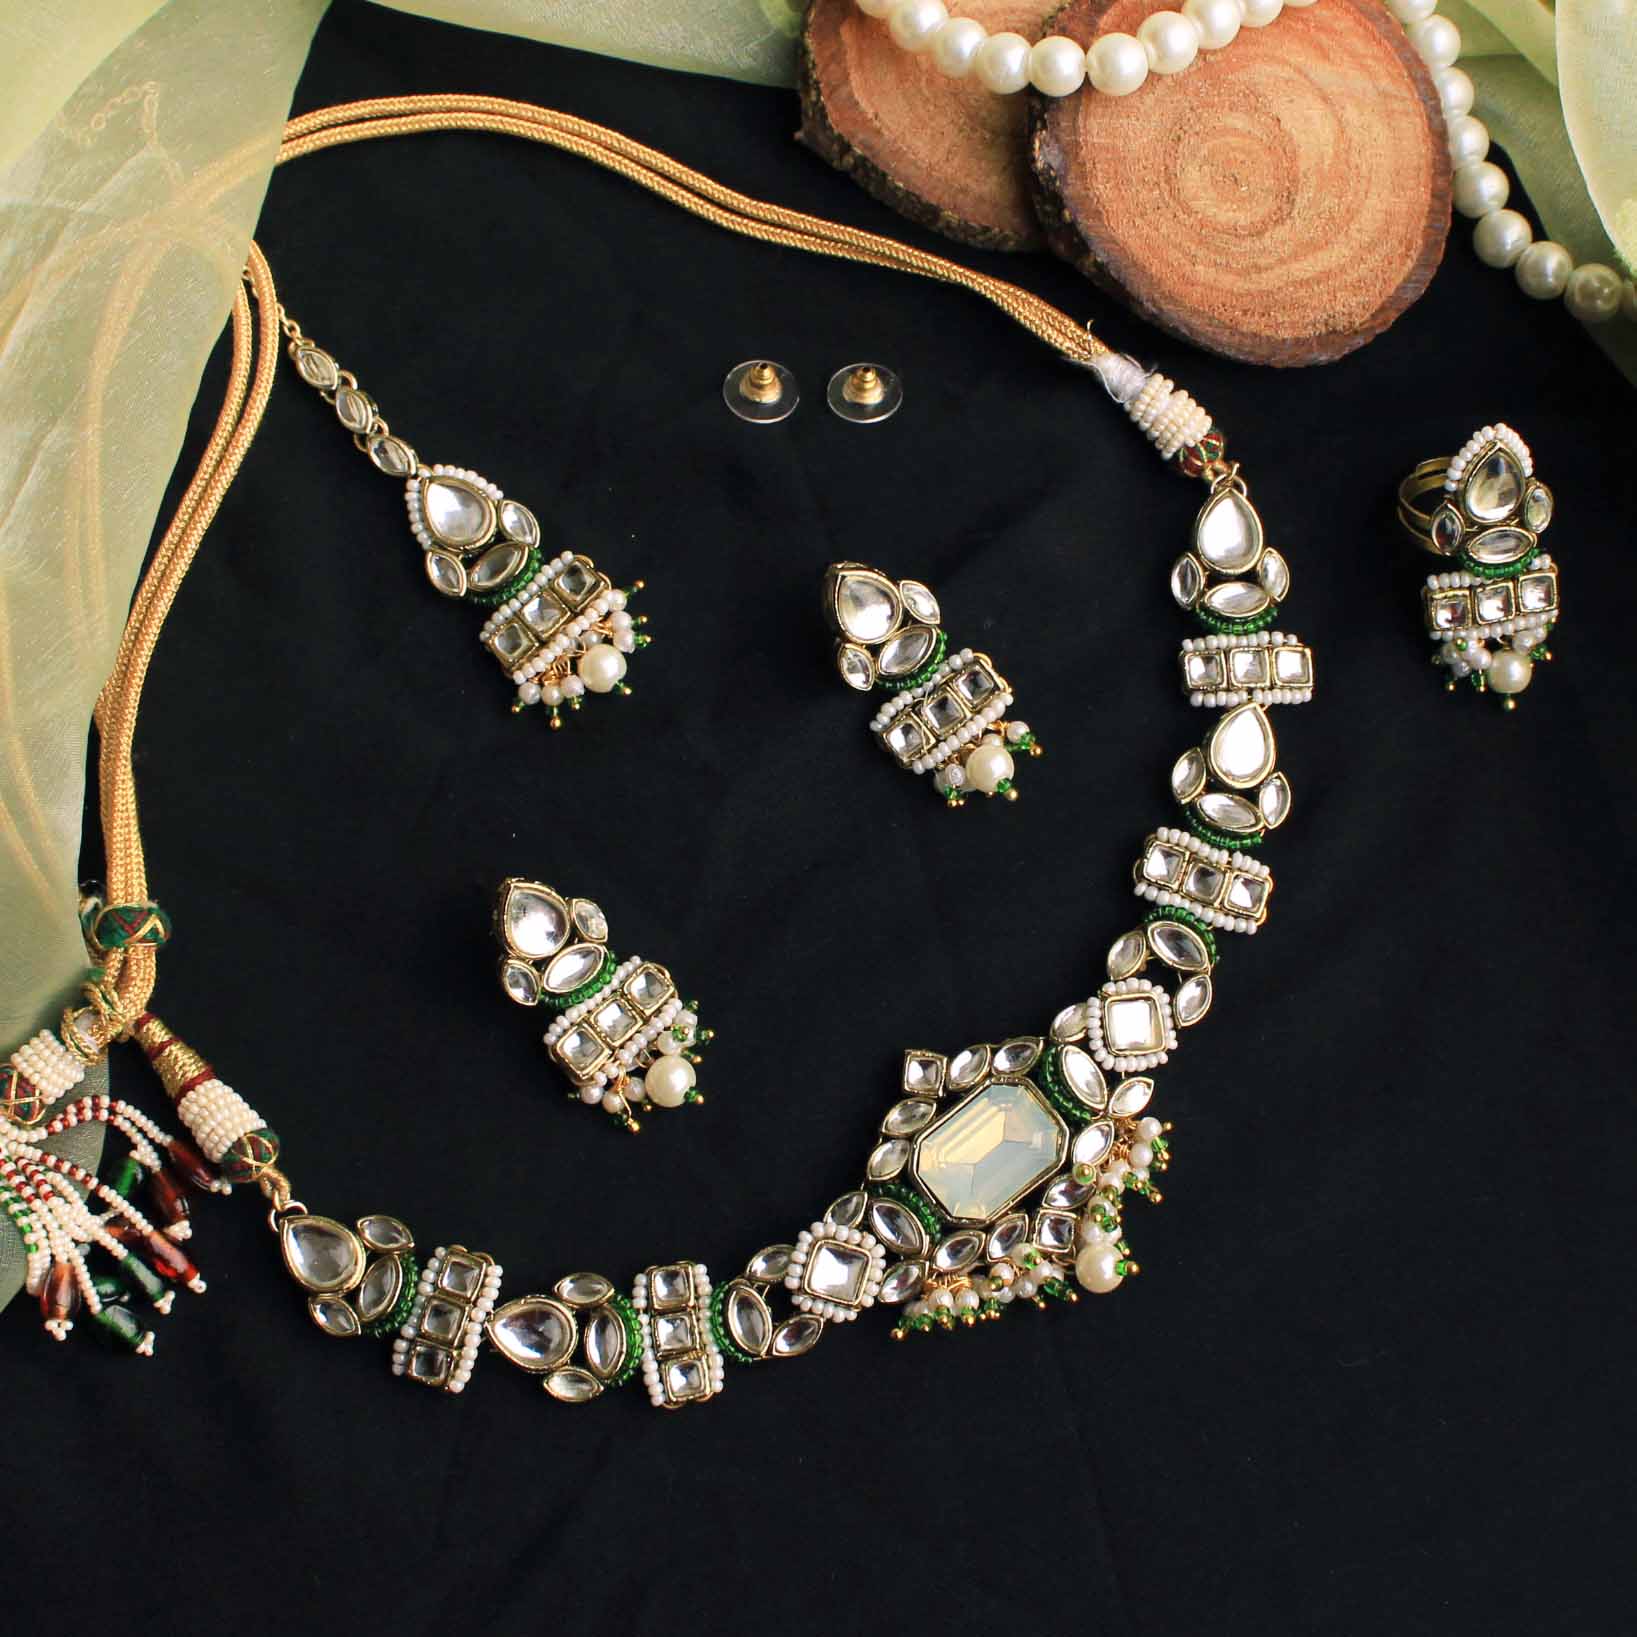 Beabhika Handmade Kundan Necklace With Matching Earrings Rings Maang Tikka Combo Set Green Artificial Jewelry Kundan Earrings Golden Earrings With Matching Ring Pearls Kundan Wedding Jewelry Trendy Earrings Daily Wear Party Wear Traditional Ethnic Dress Jewelry Earrings Bridal Jewelry Set Online Cash On Delivery Value Saver Combo Jewelry Set Cheap Price